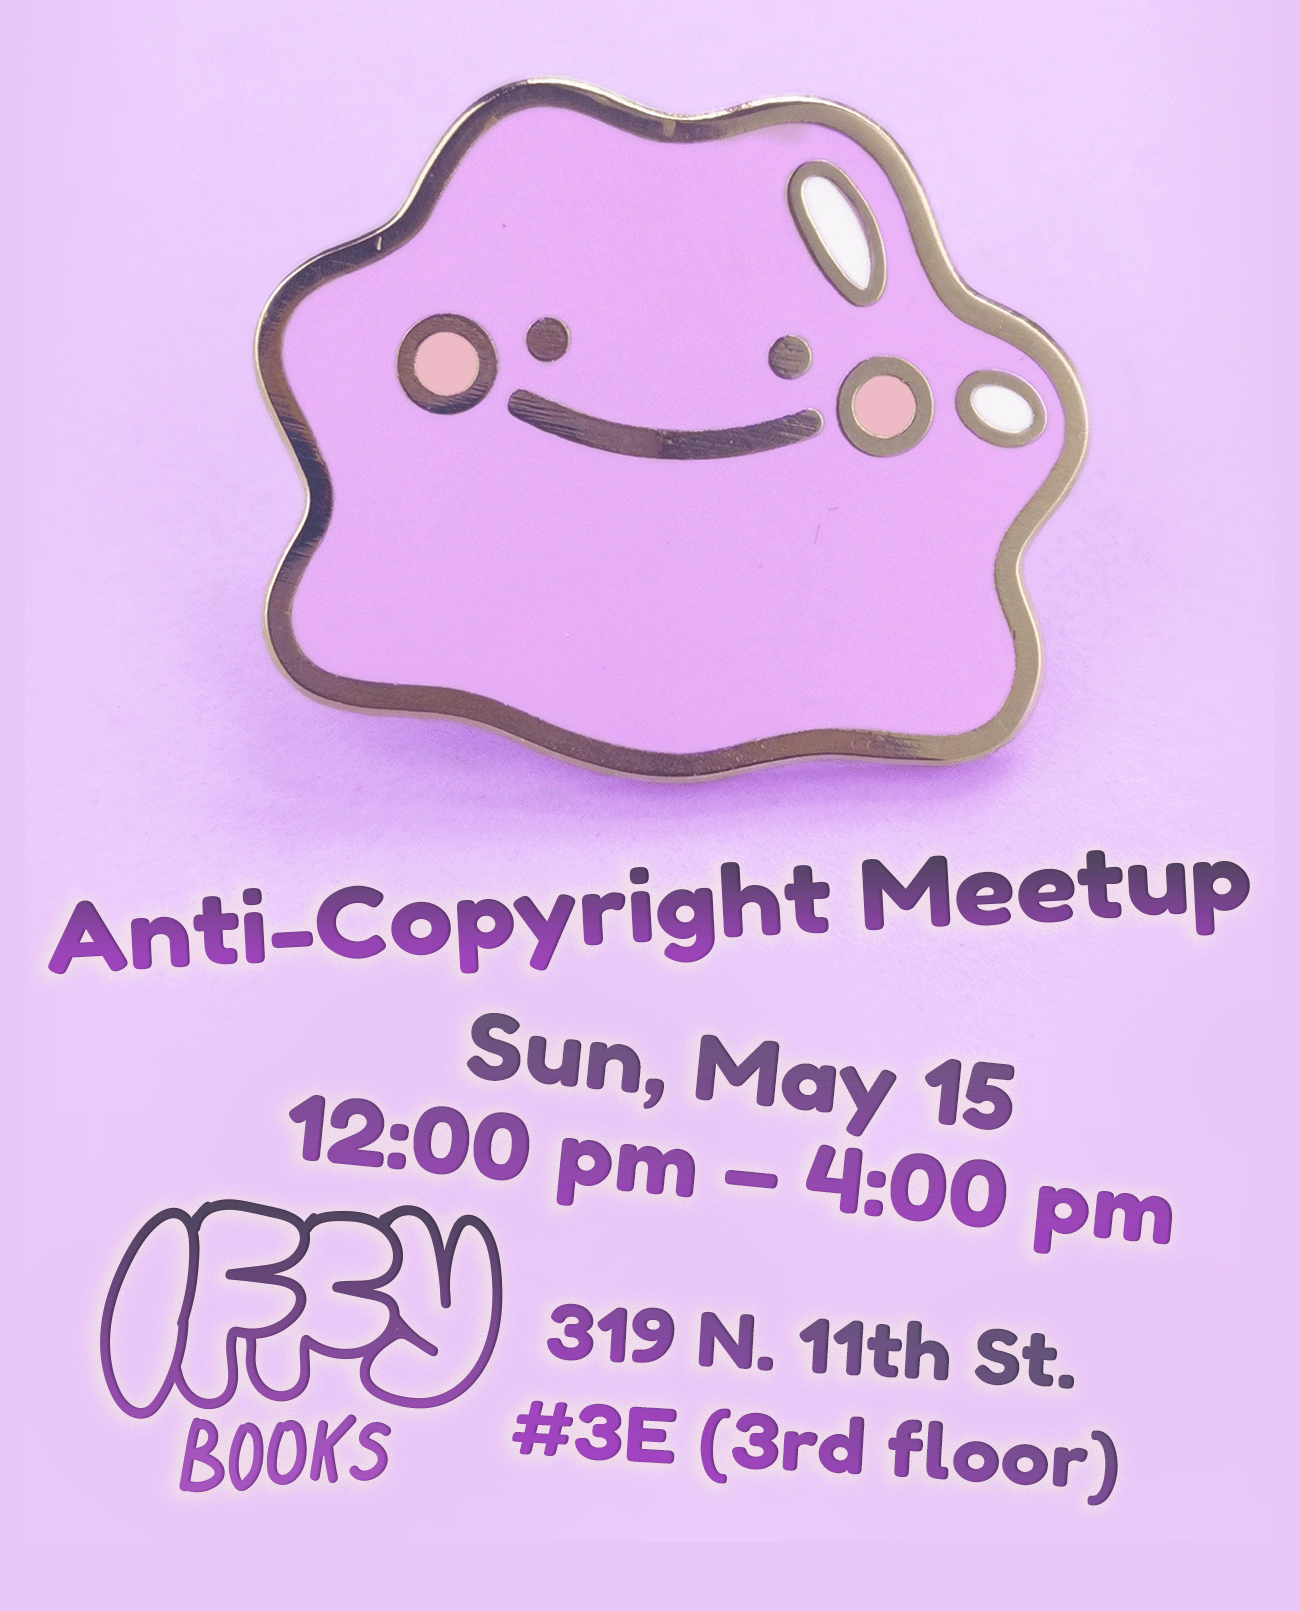 Flyer with a pastel purple background. At the top is an enamel pin of a smiling purple blob that resembles Ditto, a Pokemon character. The text beneath reads as follows: Anti-Copyright Meetup / Sun, May 15 / 12:00 pm - 4:00 pm / Iffy Books / 319 N. 11th St #3E (3rd floor)